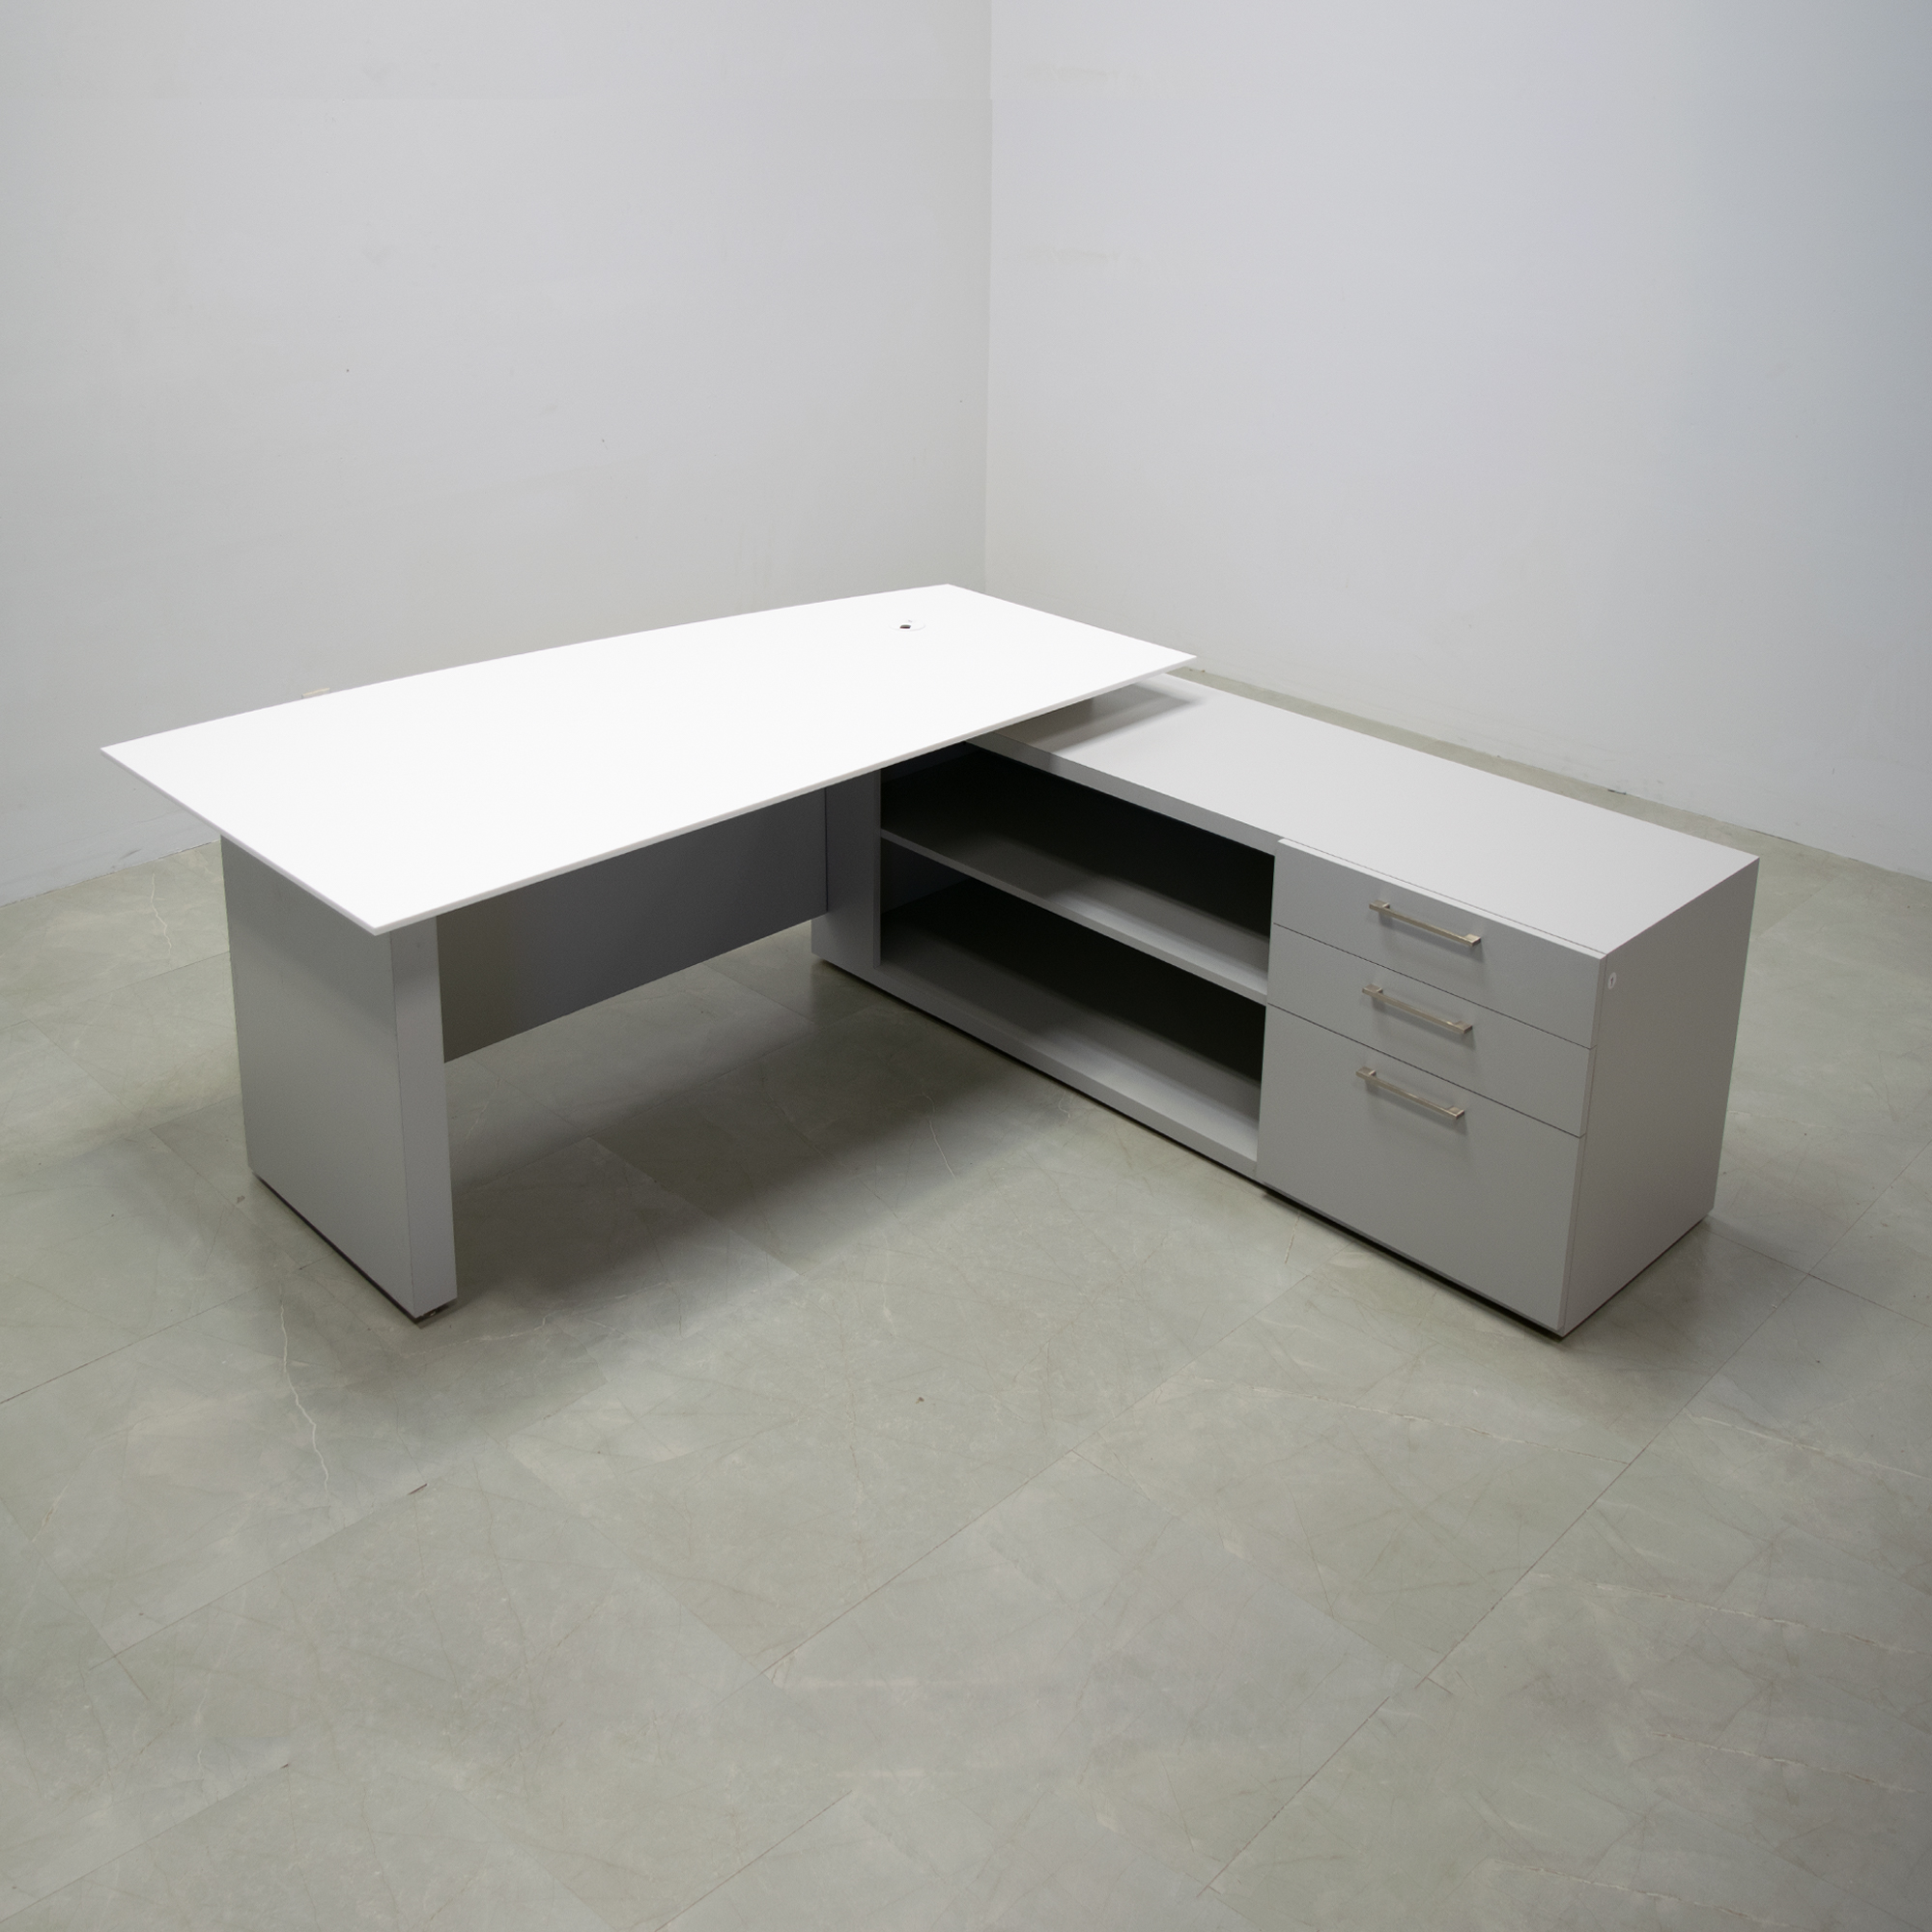 Avenue Curved Executive Desk With Credenza and Engineered Stone Top in white solid top and fog gray matte laminate base & credenza, and privacy panel shown here. 